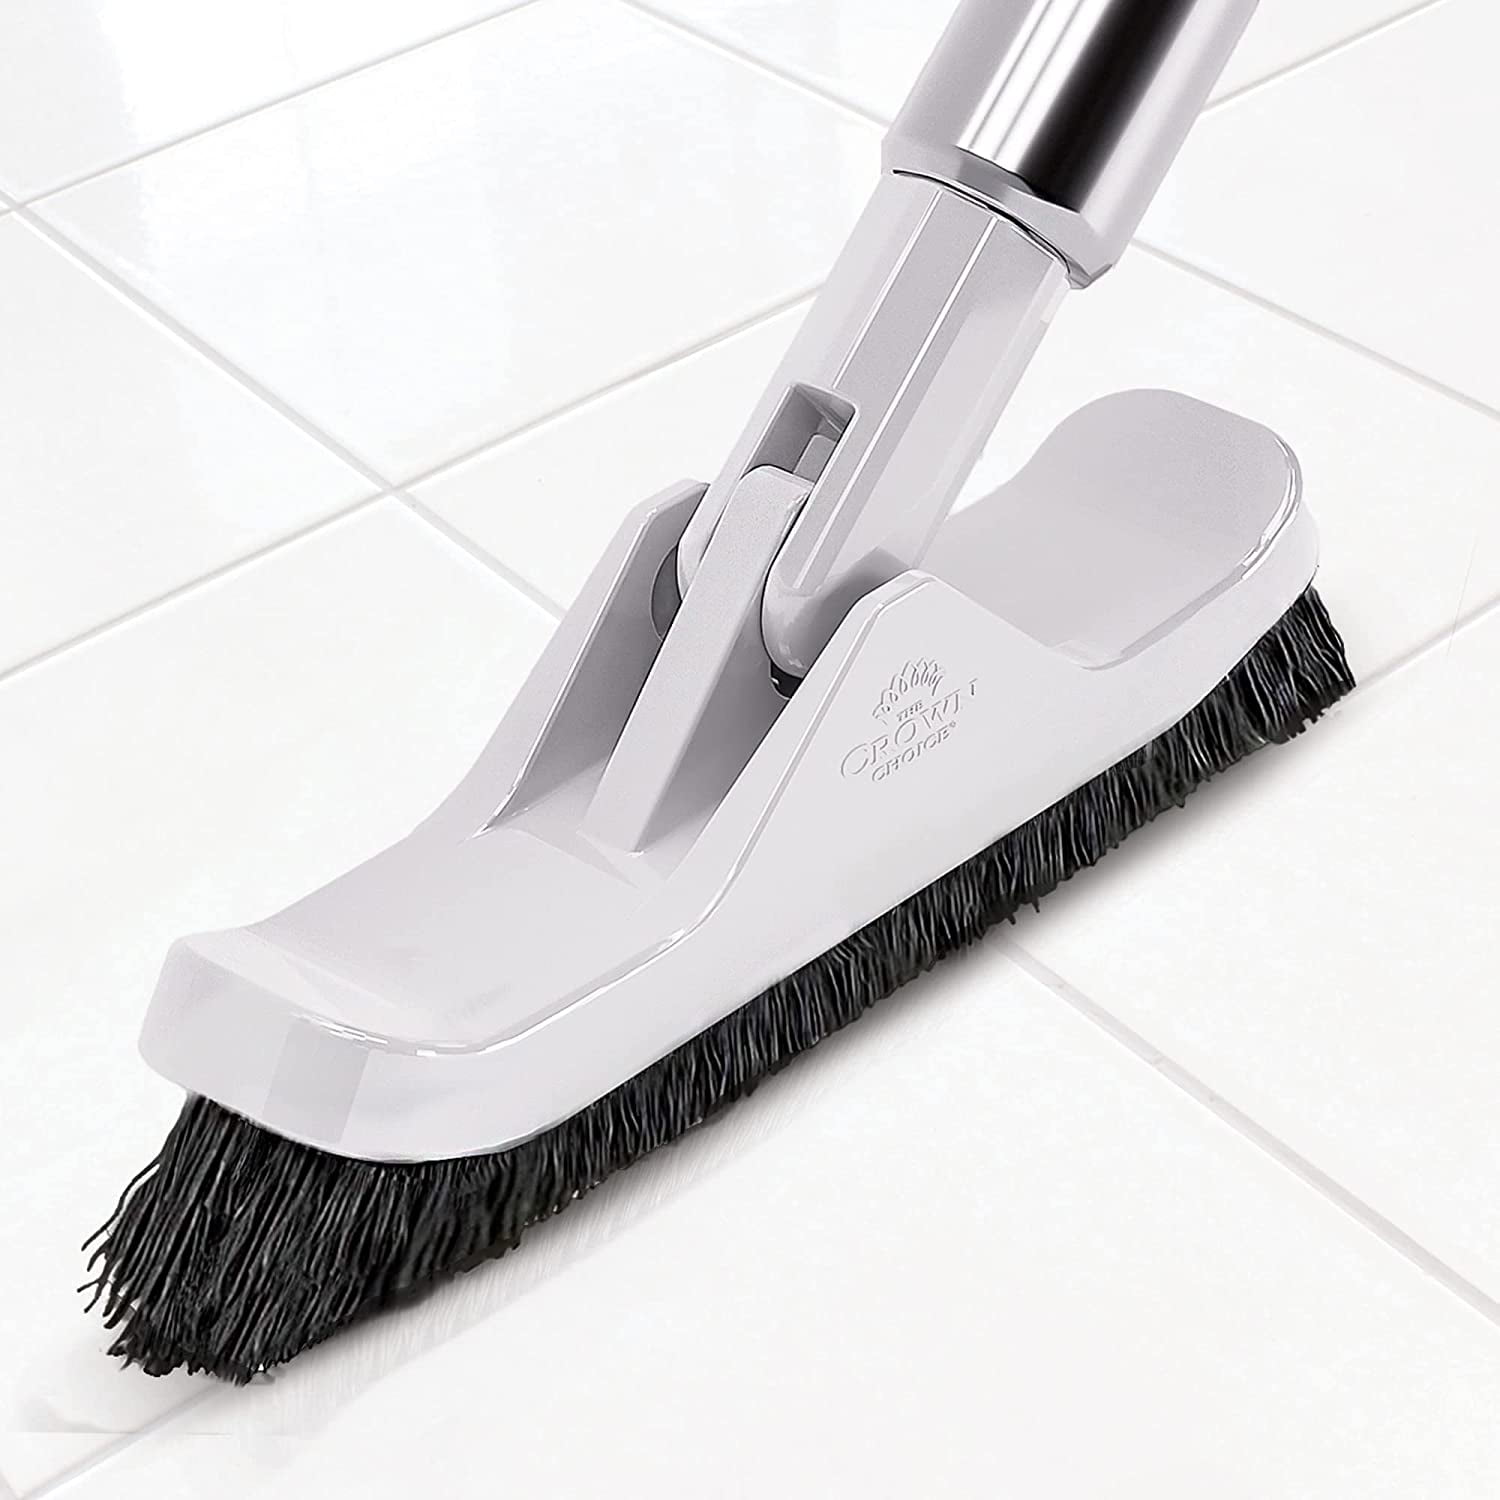 Purchase Tile Grout Brush at the Best Price